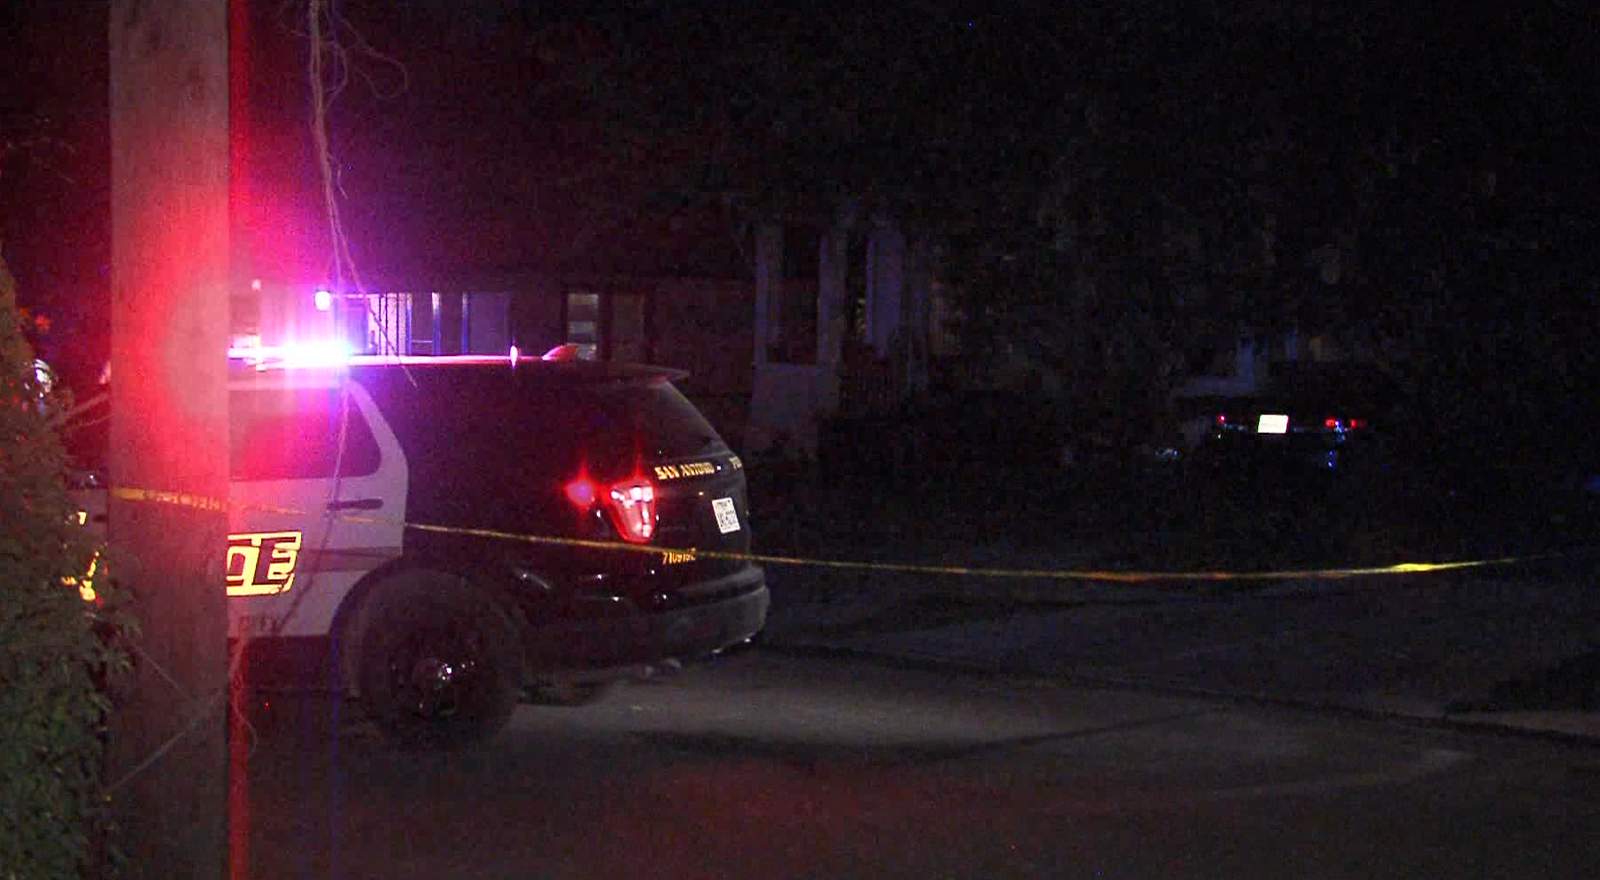 11-year-old boy in critical condition after being shot in living room, police say